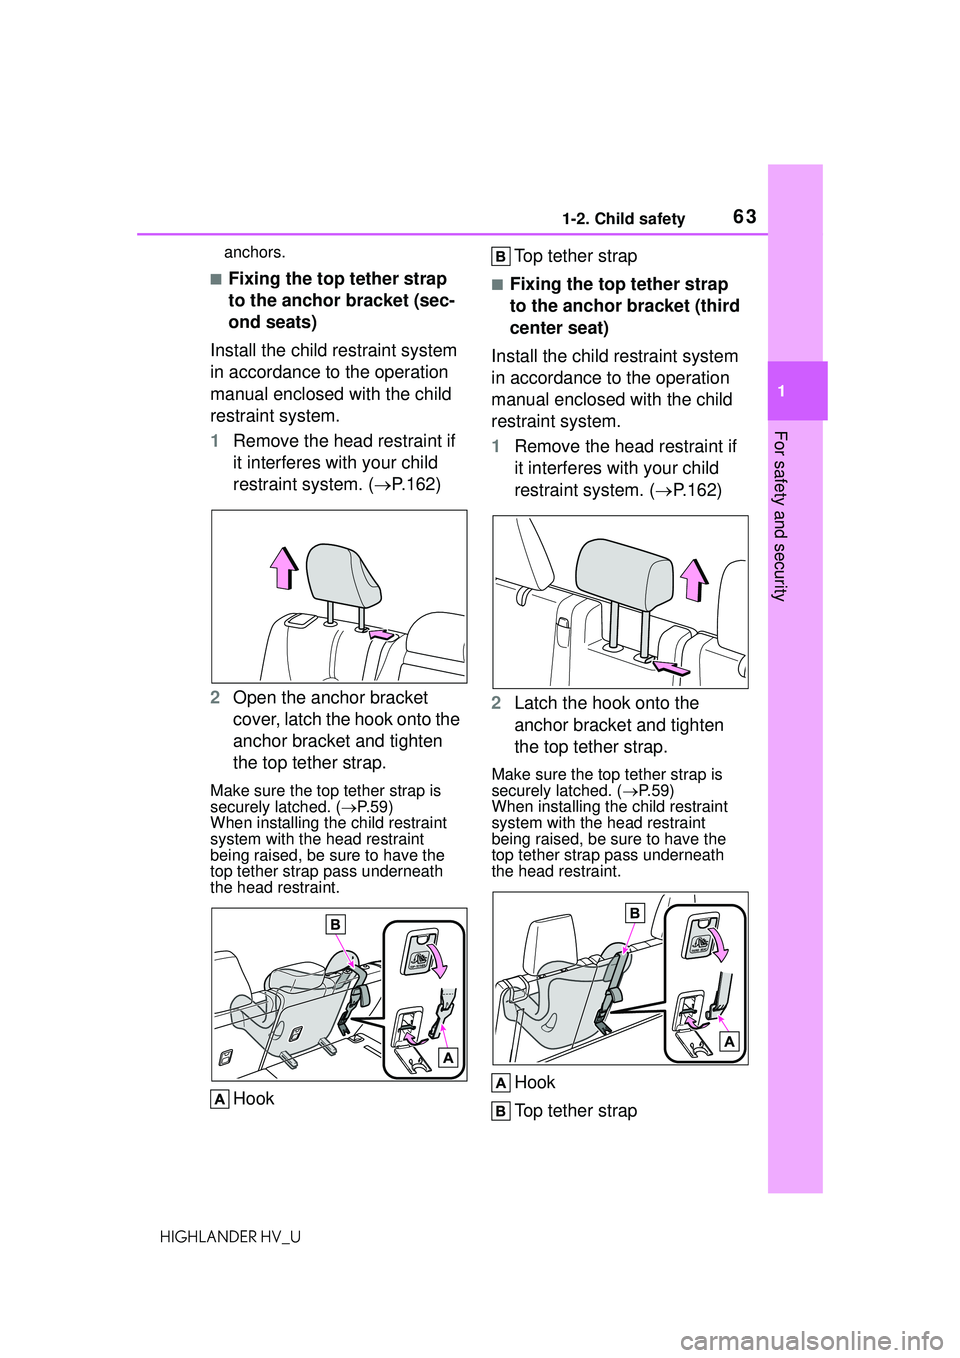 TOYOTA HIGHLANDER HYBRID 2021  Owners Manual (in English) 631-2. Child safety
1
For safety and security
HIGHLANDER HV_Uanchors.
■Fixing the top tether strap 
to the anchor bracket (sec-
ond seats)
Install the child restraint system 
in accordance to the op